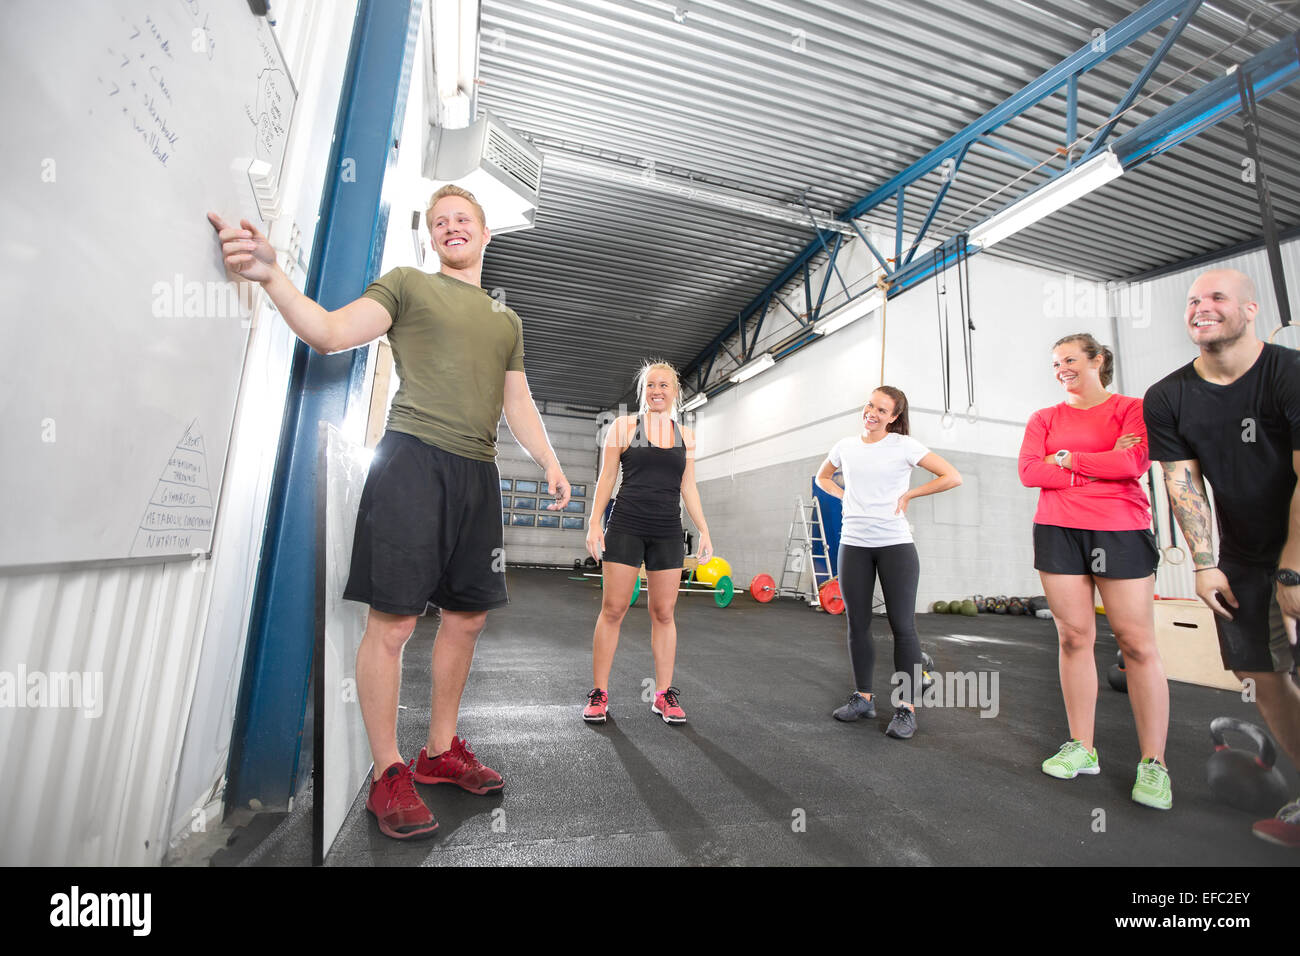 Crossfit training course Stock Photo